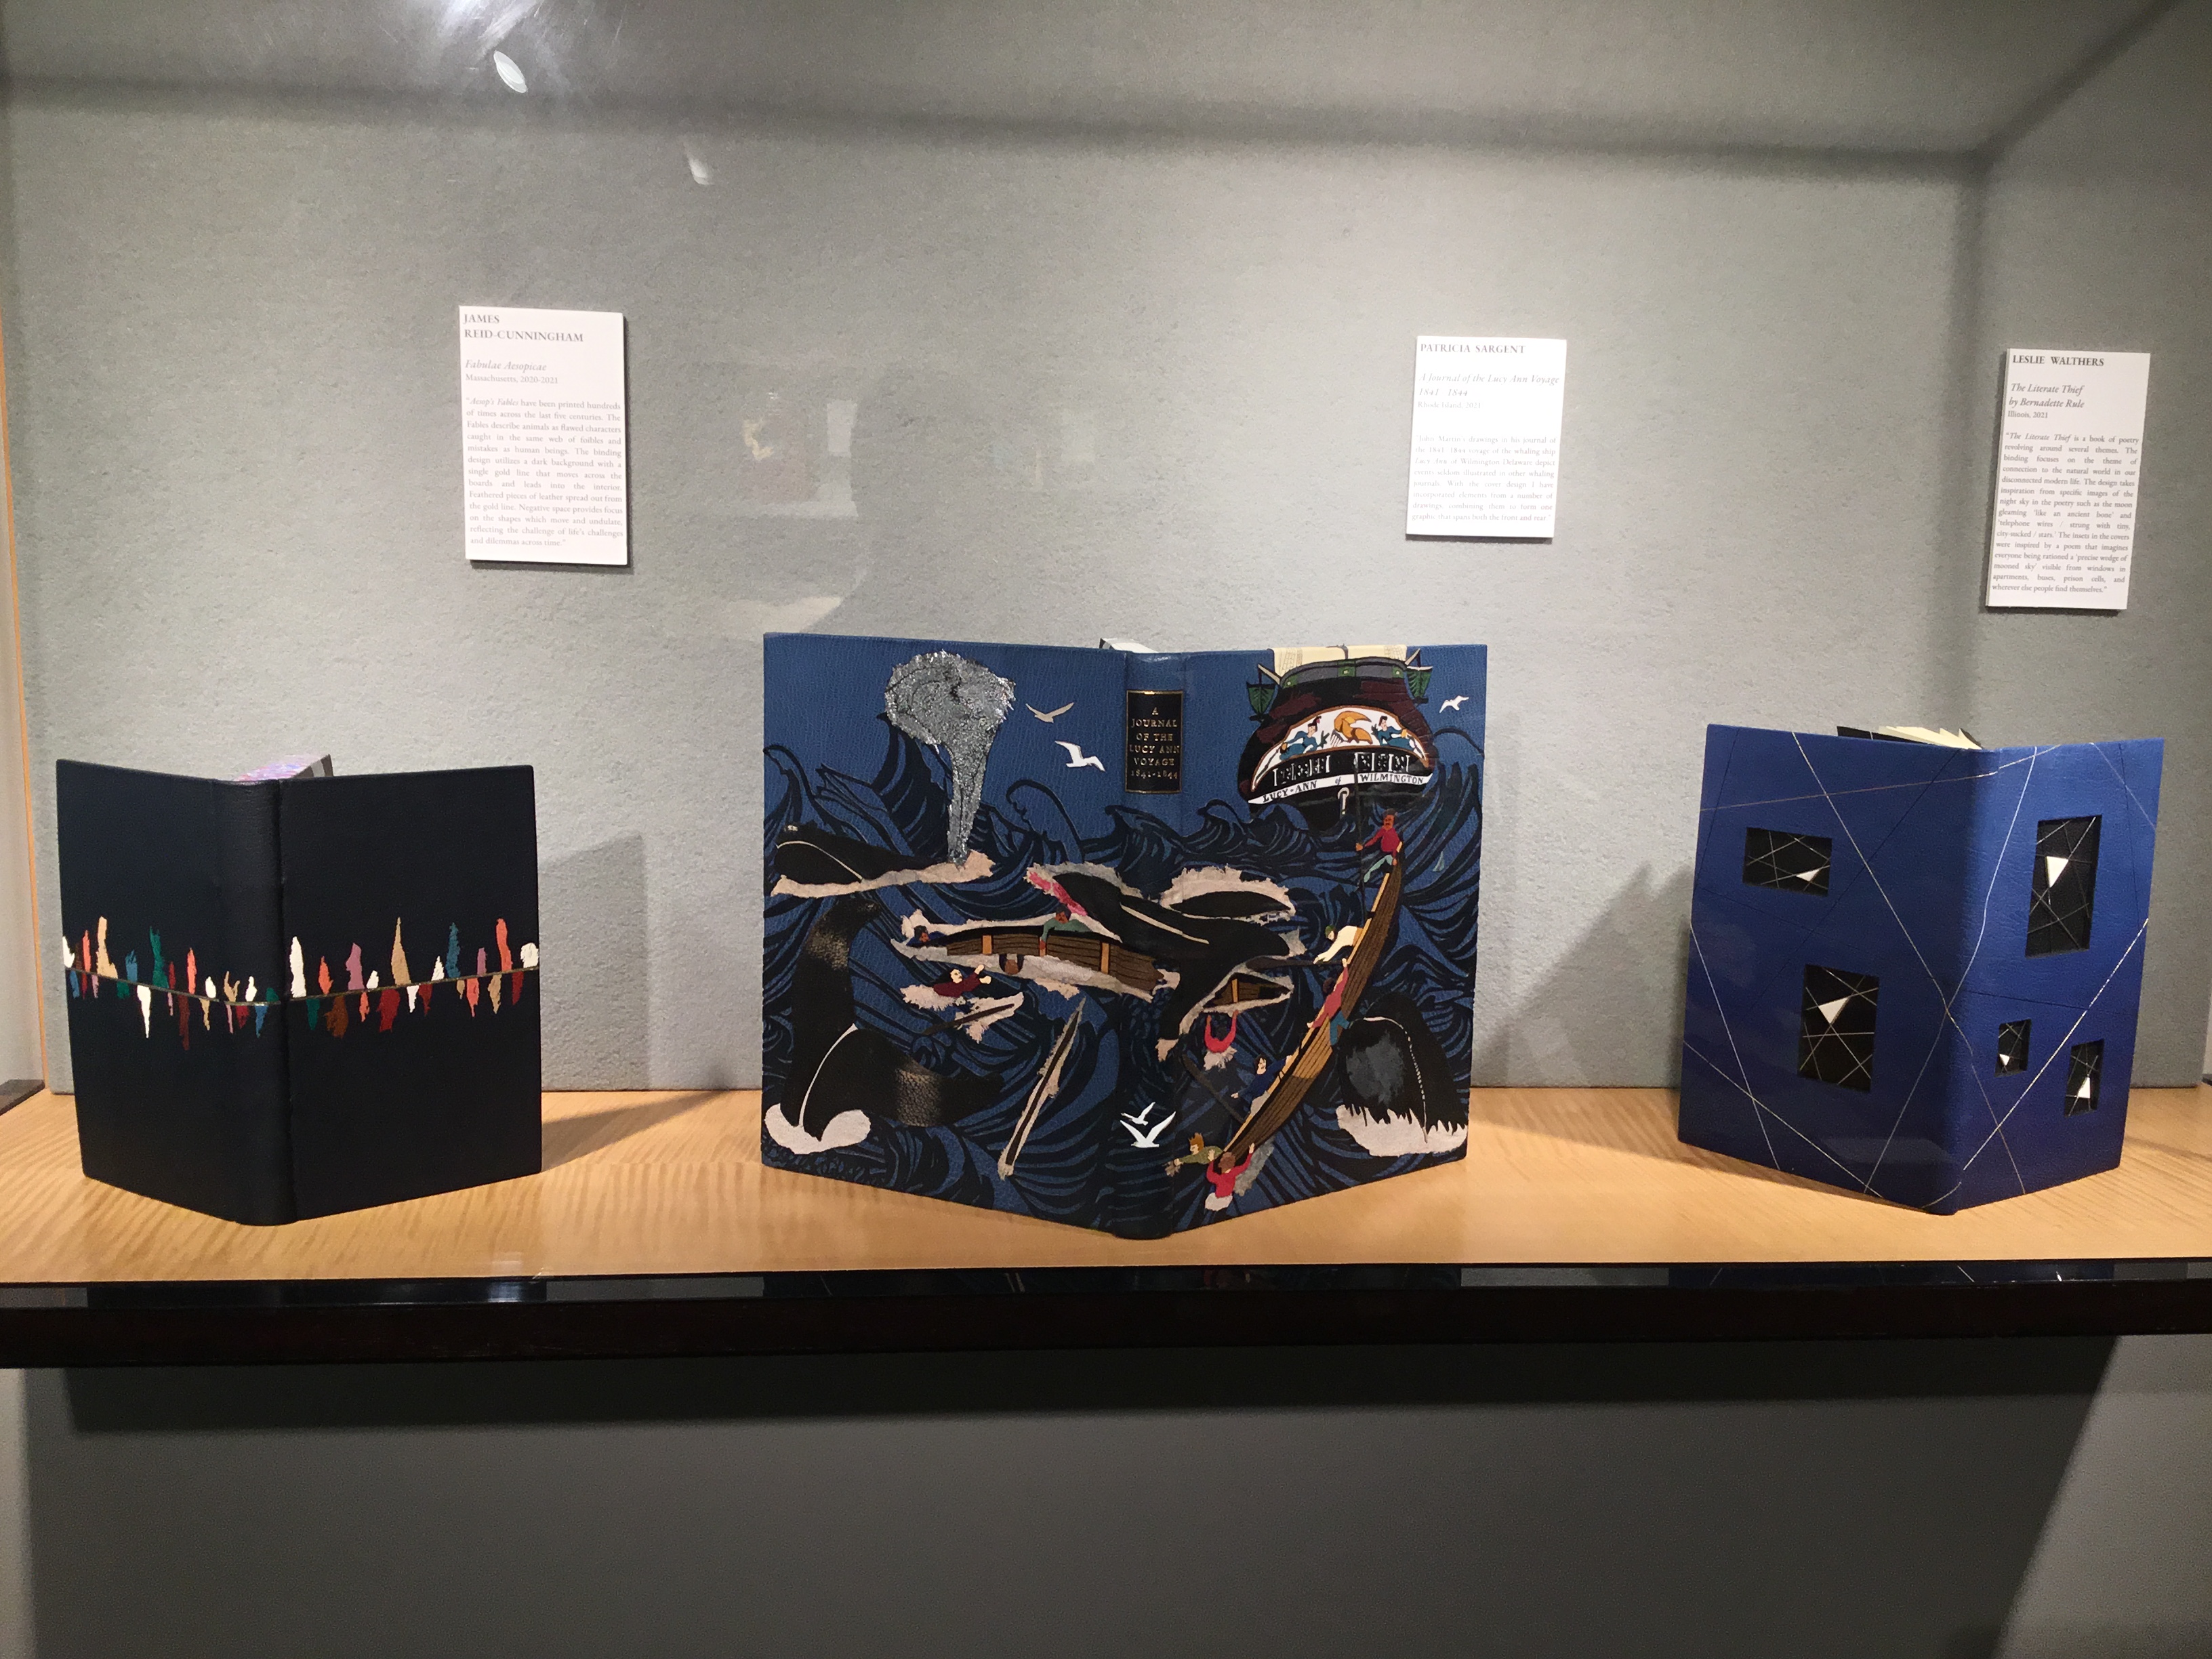 A hanging plexiglass case contains three blue books of various shades, two with fascinating abstract covers and one with a nautical illustration spanning its back, spine, and front.